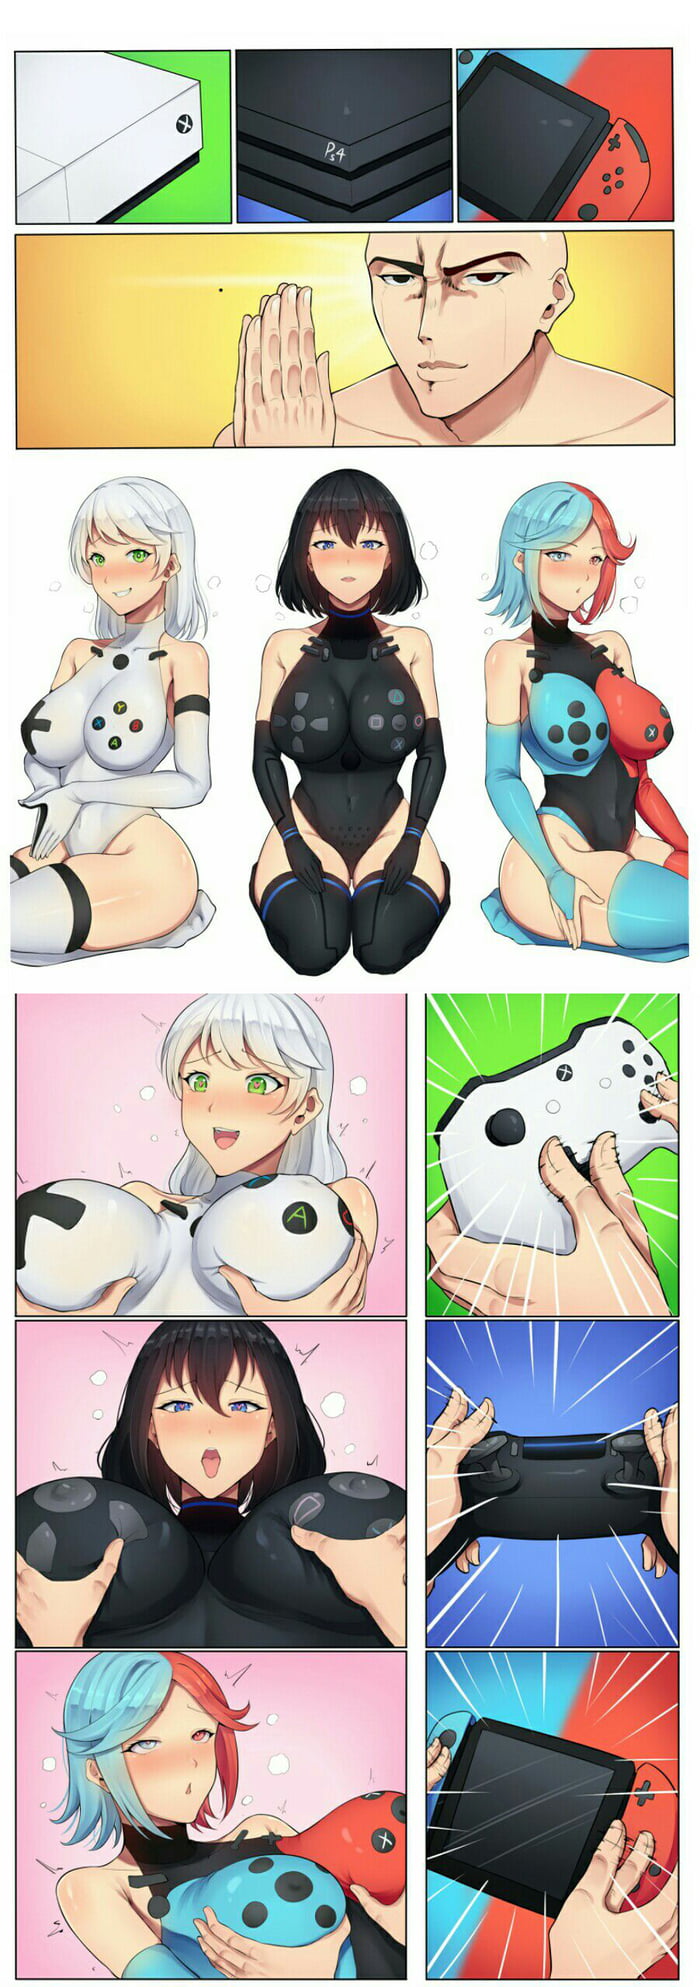 Everything is lewder in anime girl